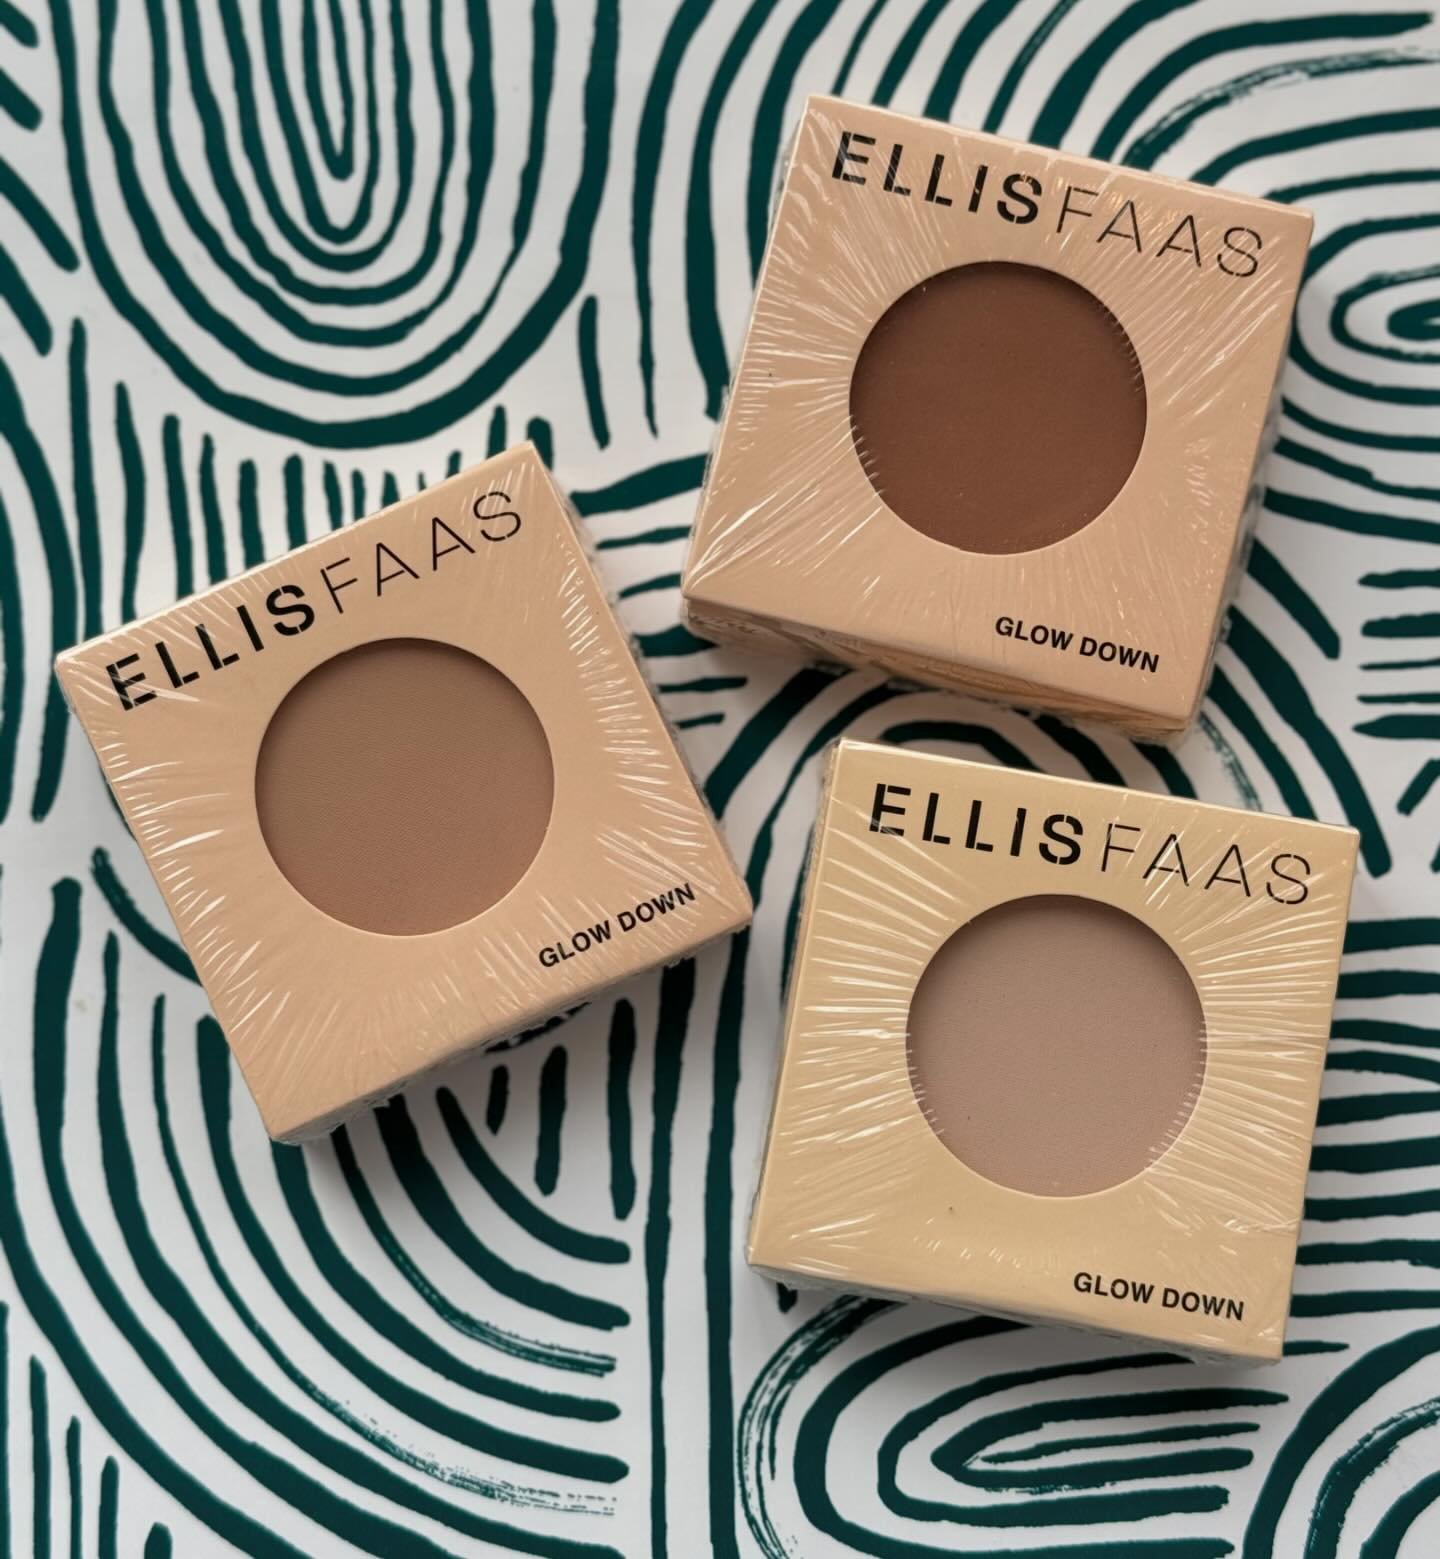 Back in stock! ELLIS FAAS Glow Down Compact Powder, the perfect multi-purpose mattifier that blurs pores and imperfections, smooths the skin, sets makeup, and takes control of shine while only adding to a natural glow.
Need a makeup reset? Book a Mak